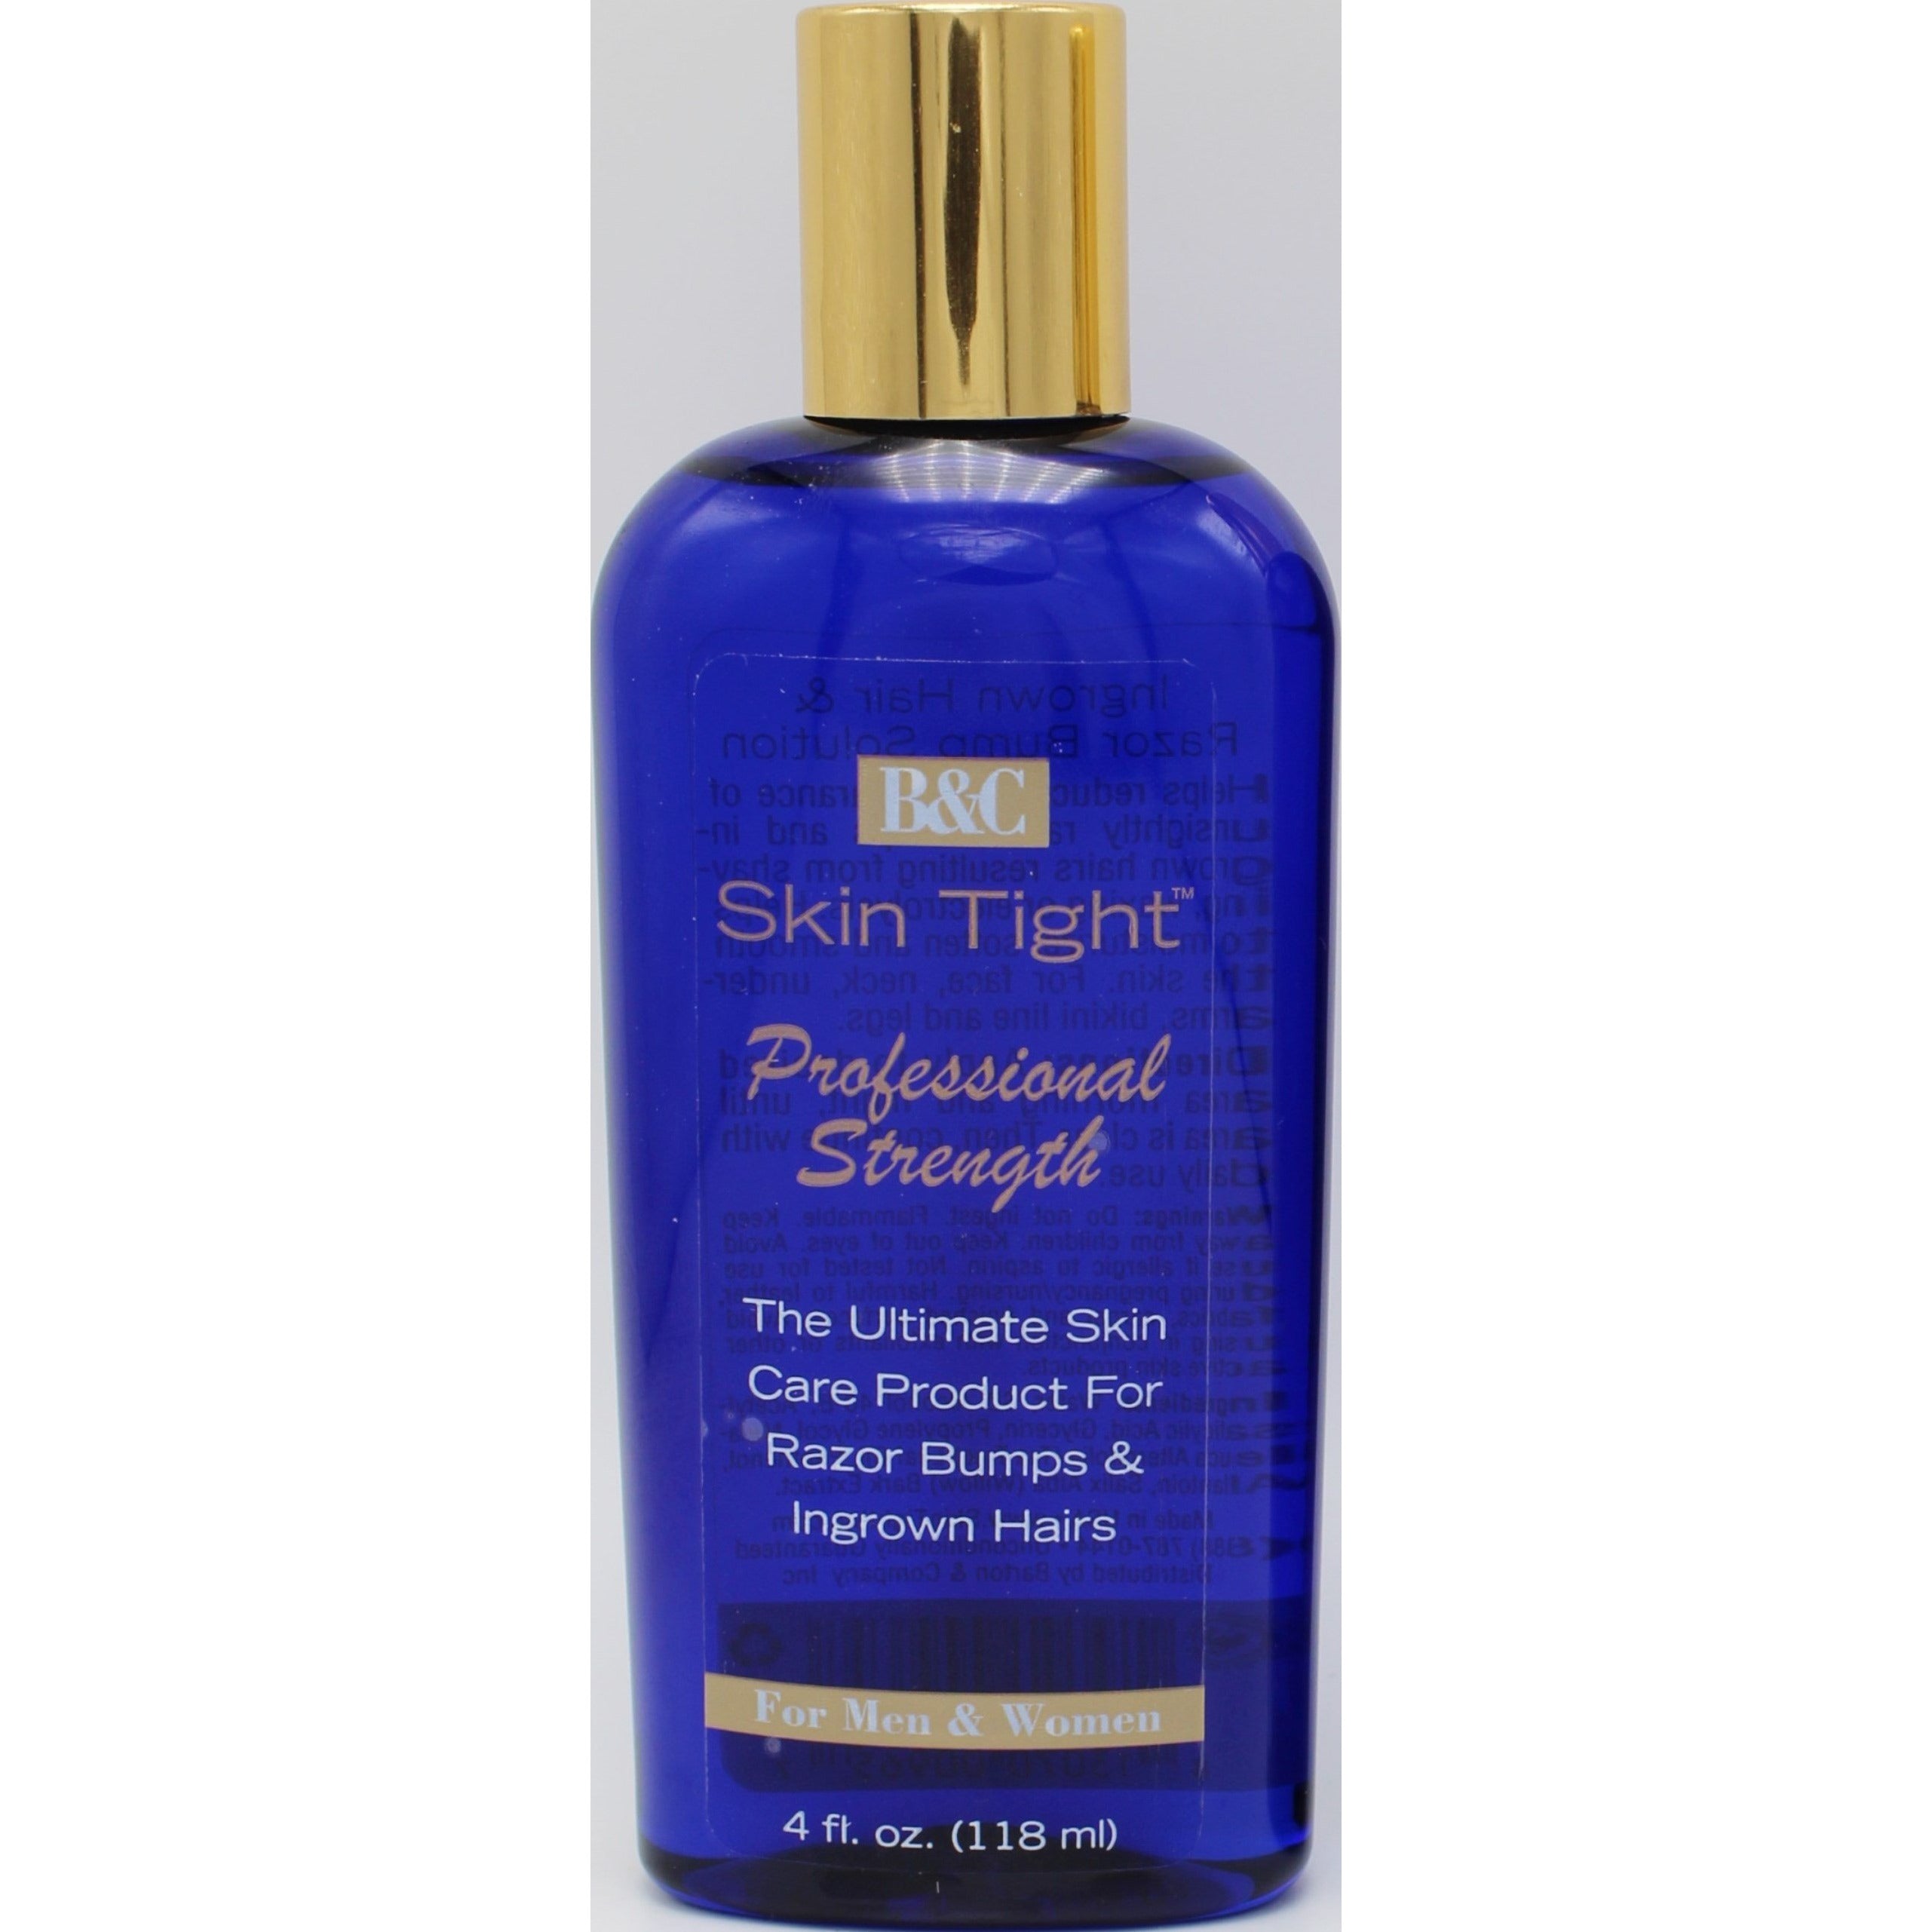 4th Ave Market: Skin Tight Professional Strength, 4 Ounces